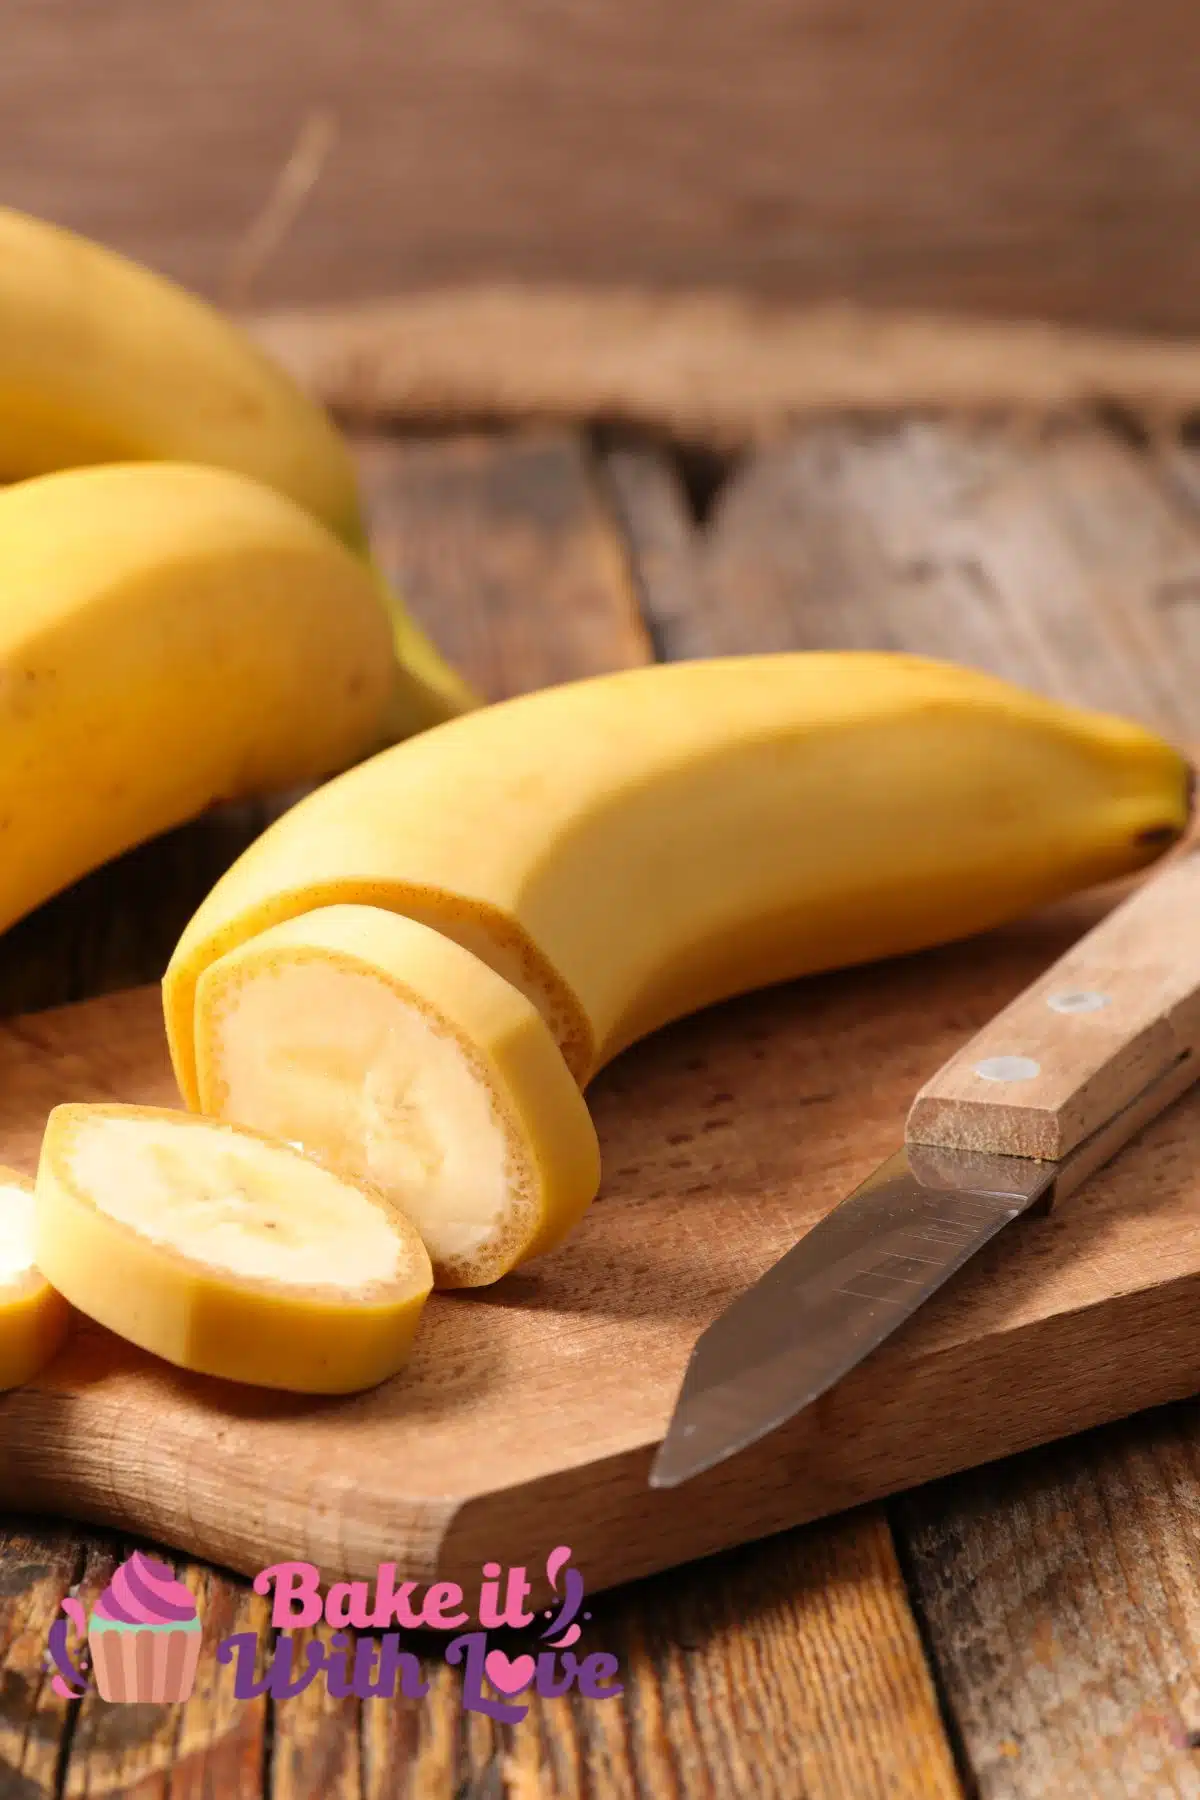 Best banana substitute featuring yellow bananas on a small cutting board with paring knife and a few pieces sliced.